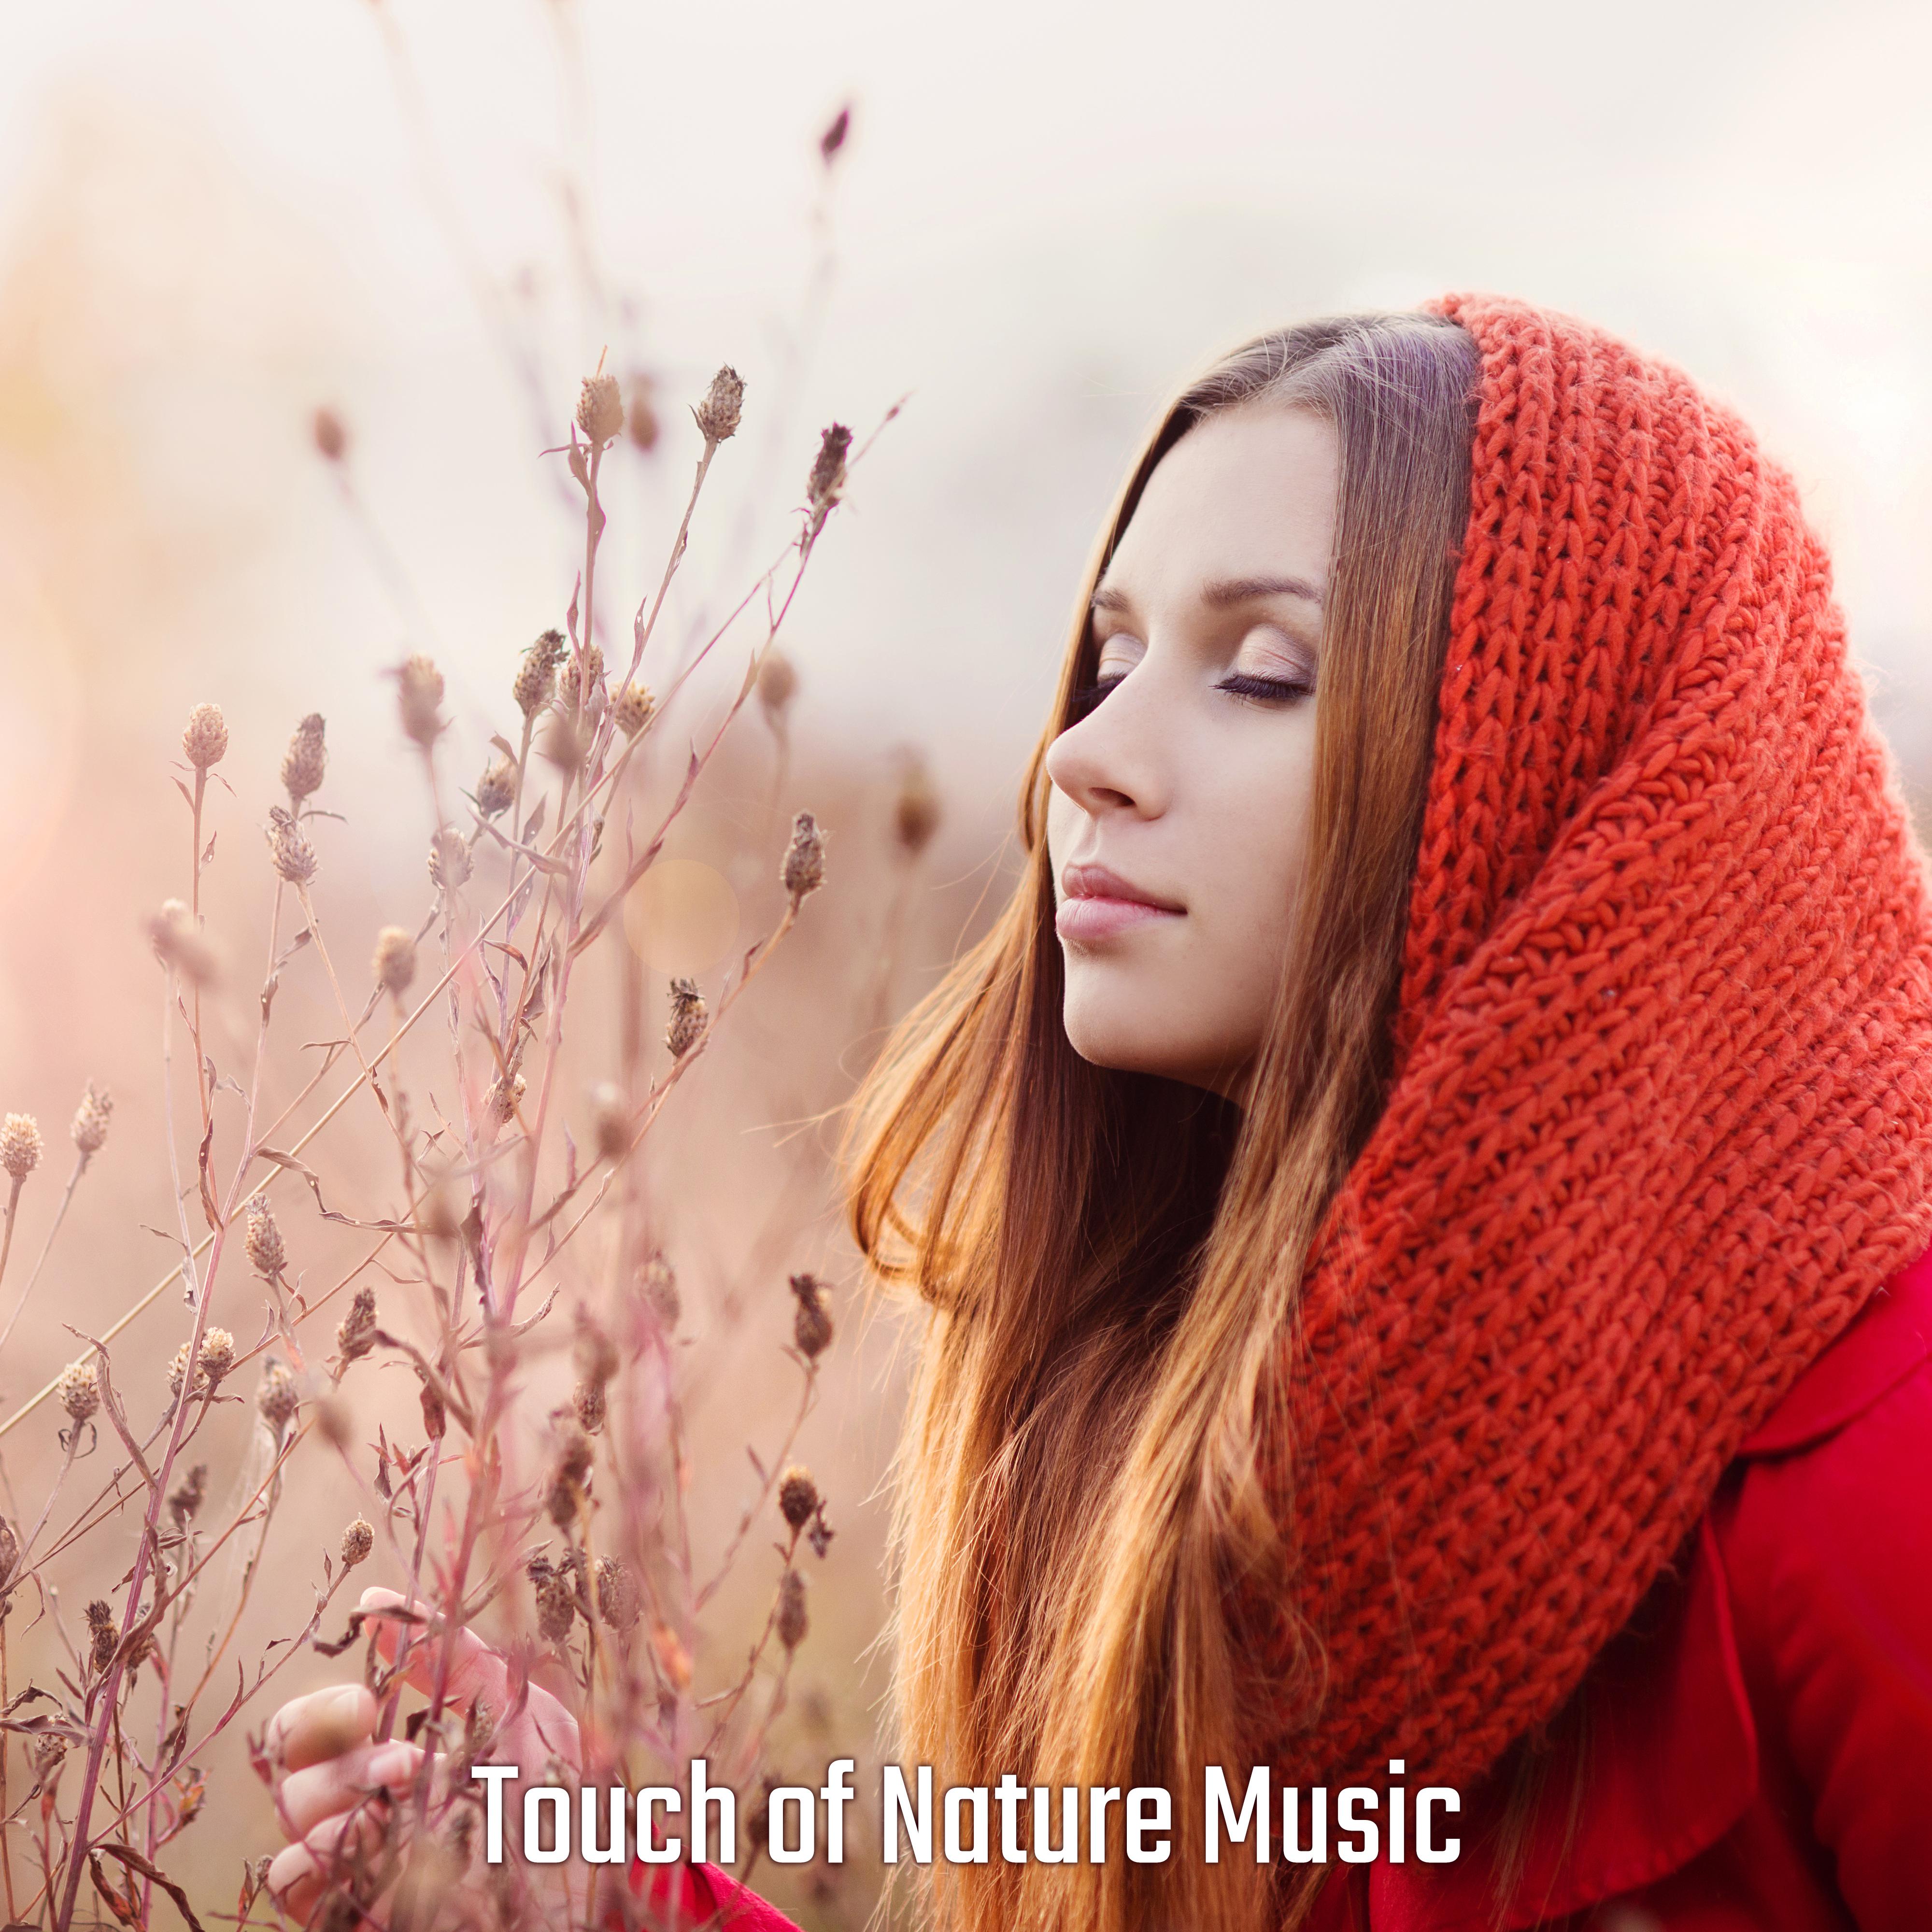 Touch of Nature Music  Soothing Nature Sounds for Relaxation, Sleep, Deep Meditation, Ambient Music, Zen, New Age Relaxing Collection, Stress Relief